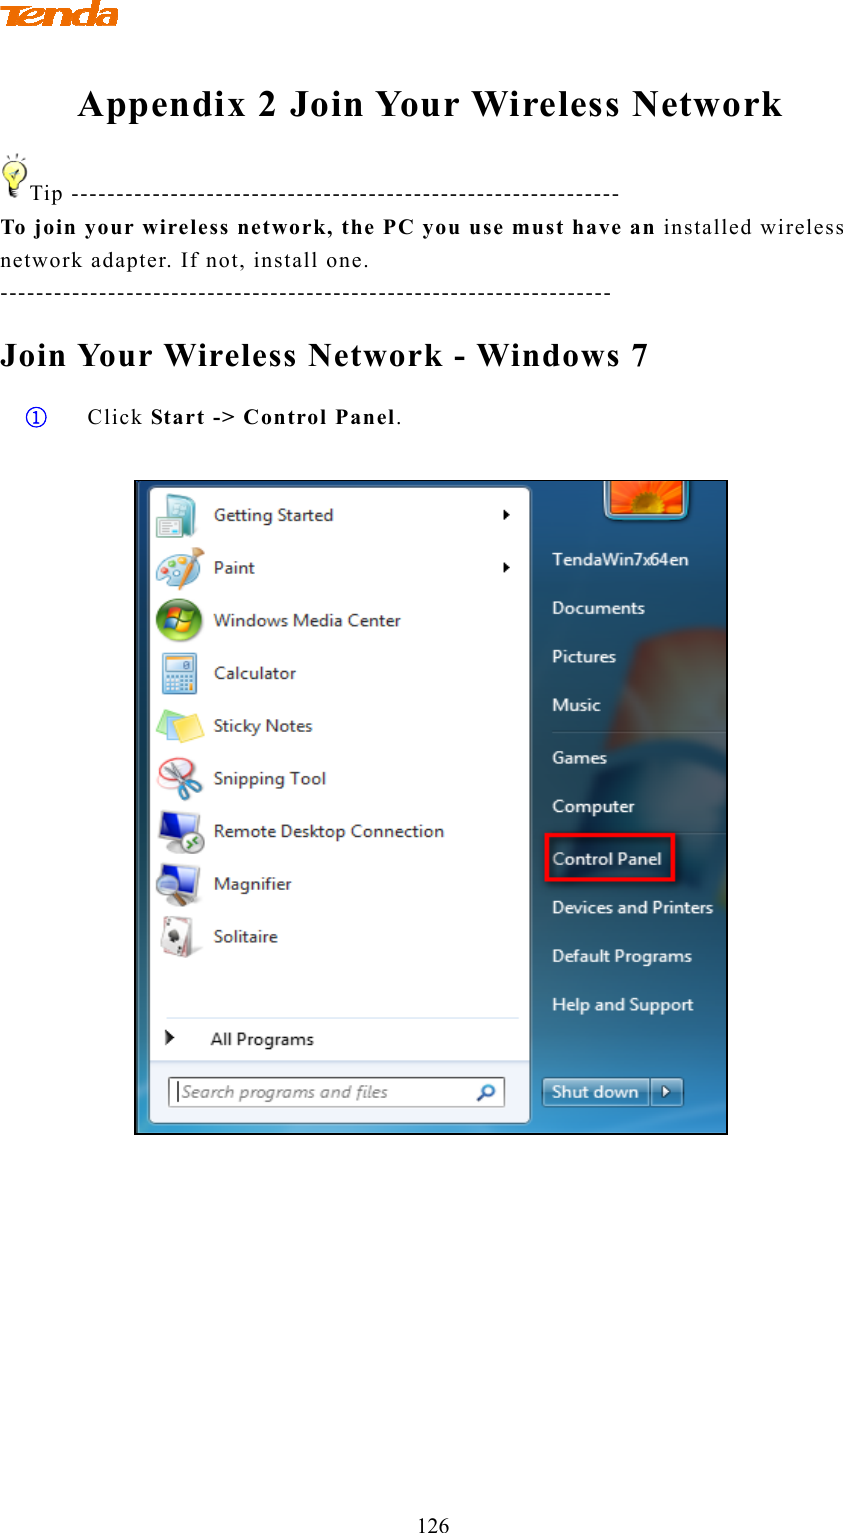                                   126 Appendix 2 Join Your Wireless Network Tip ------------------------------------------------------------- To join your wireless network, the PC you use must have an installed wireless network adapter. If not, install one. -------------------------------------------------------------------- Join Your Wireless Network - Windows 7 ① Click Start -&gt; Control Panel.   